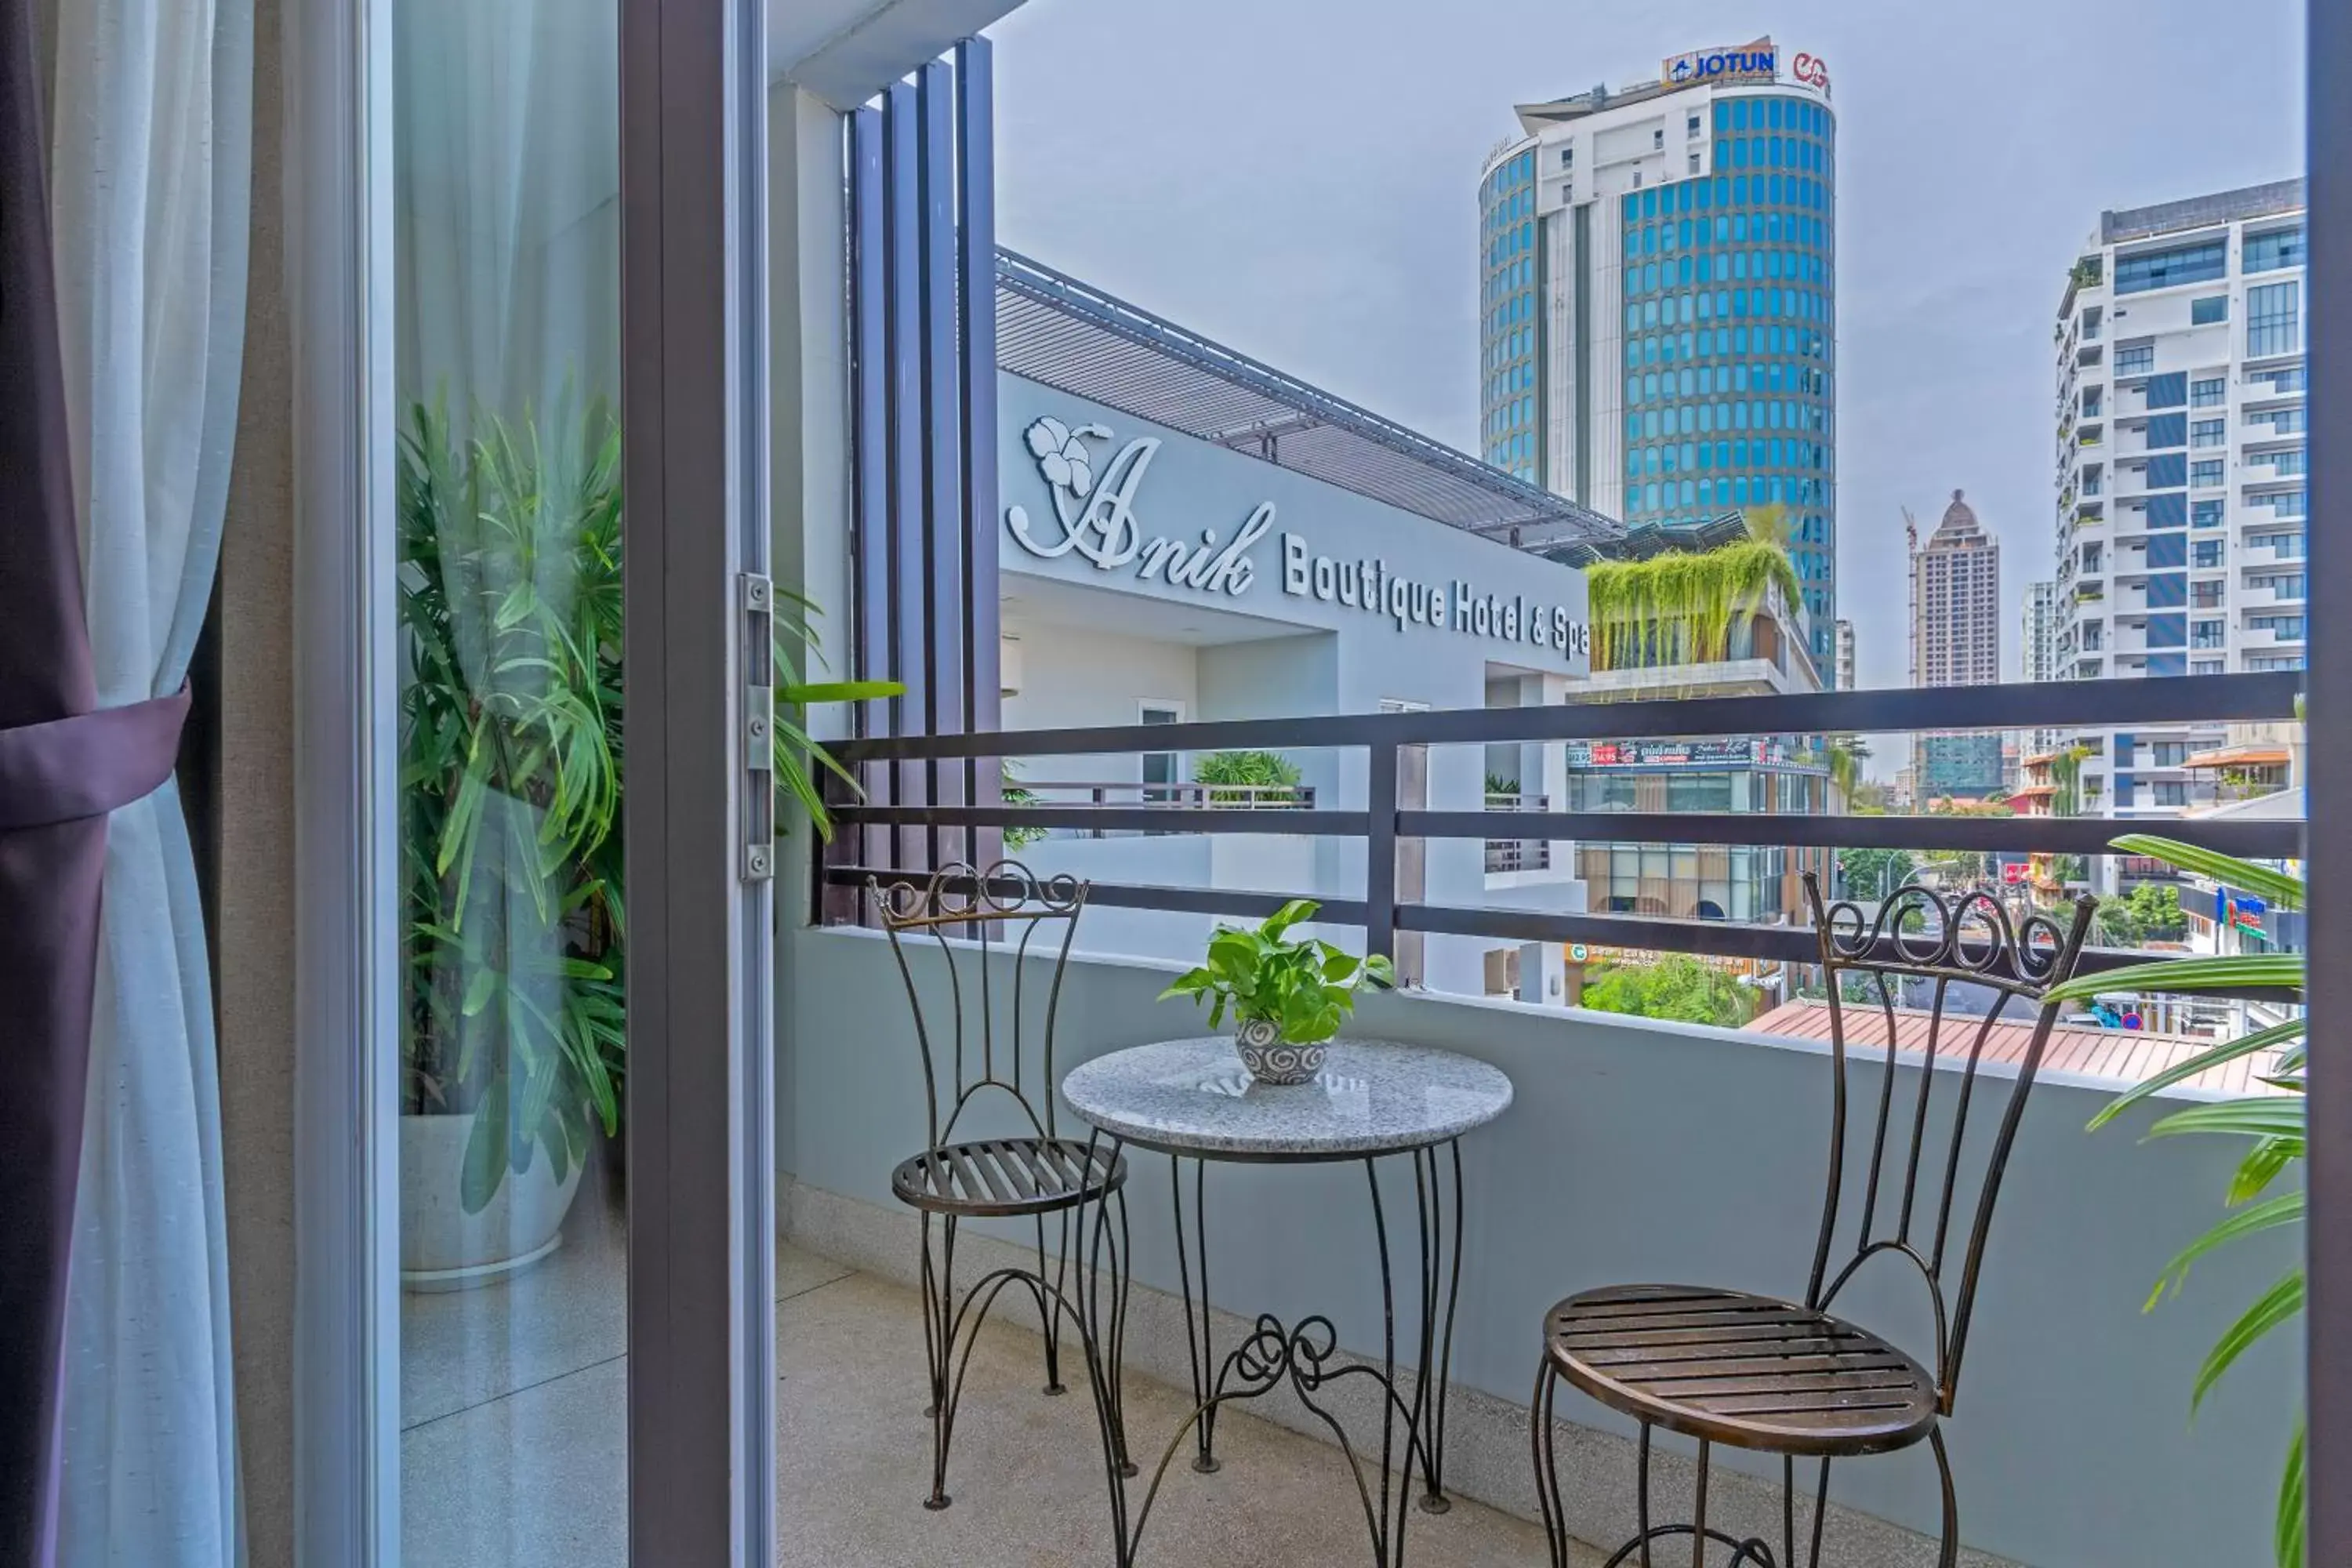 View (from property/room), Balcony/Terrace in Anik Boutique Hotel & Spa on Norodom Blvd